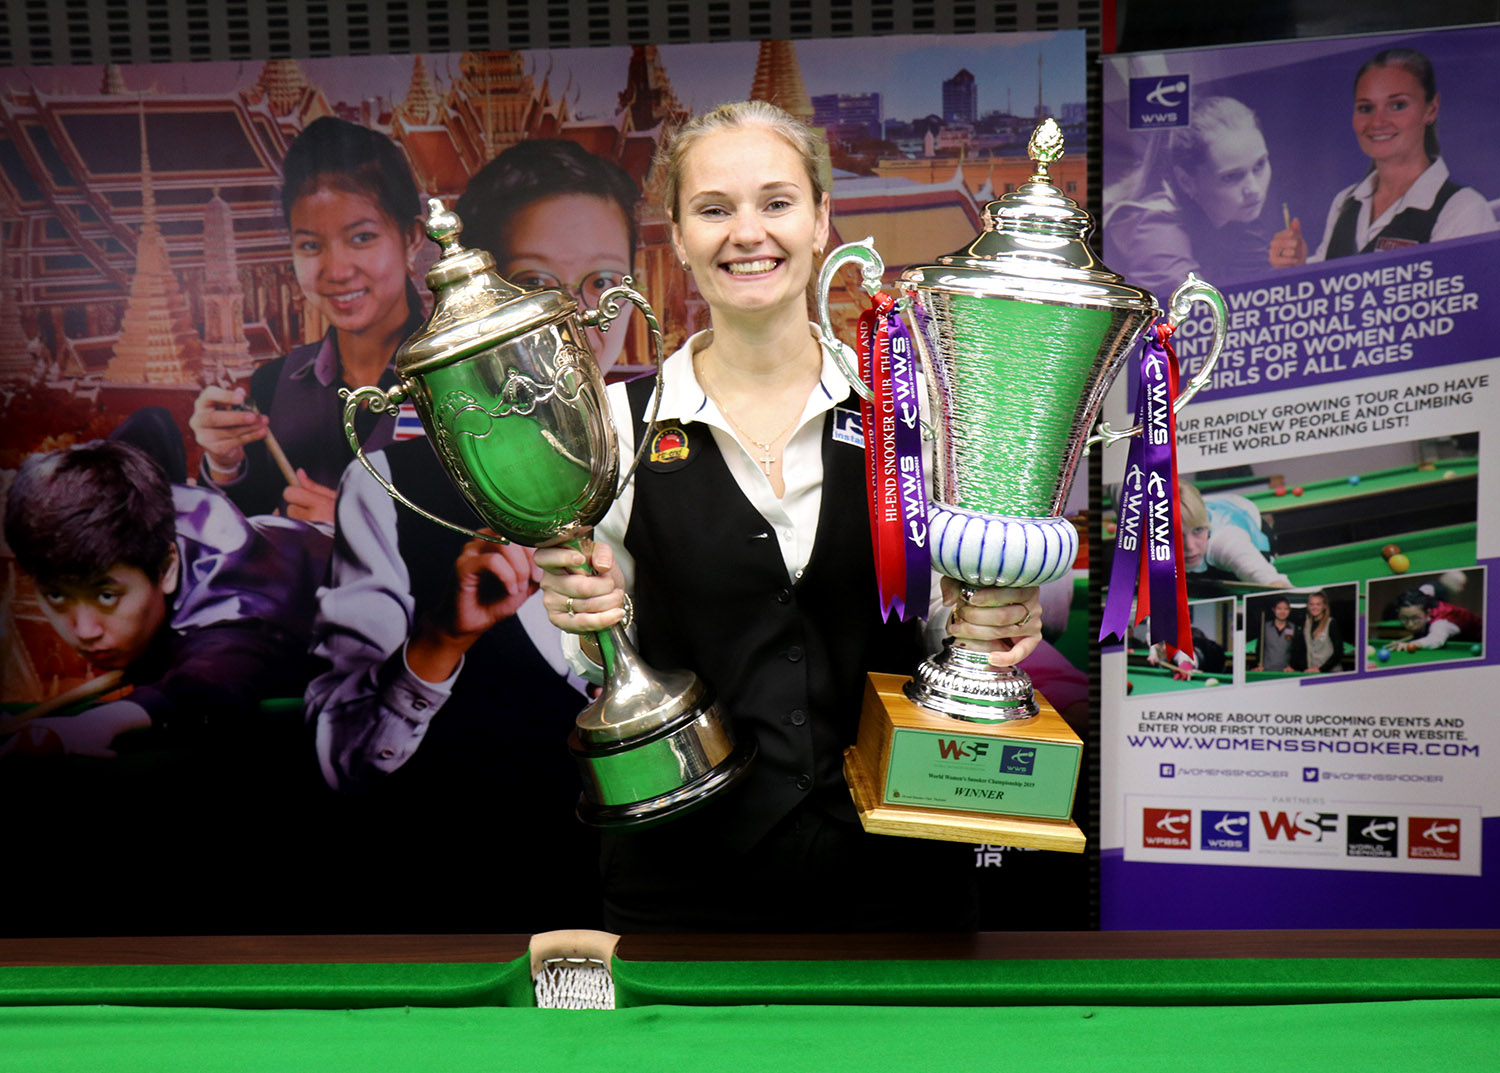 World Womens Snooker Championship to Return to Thailand